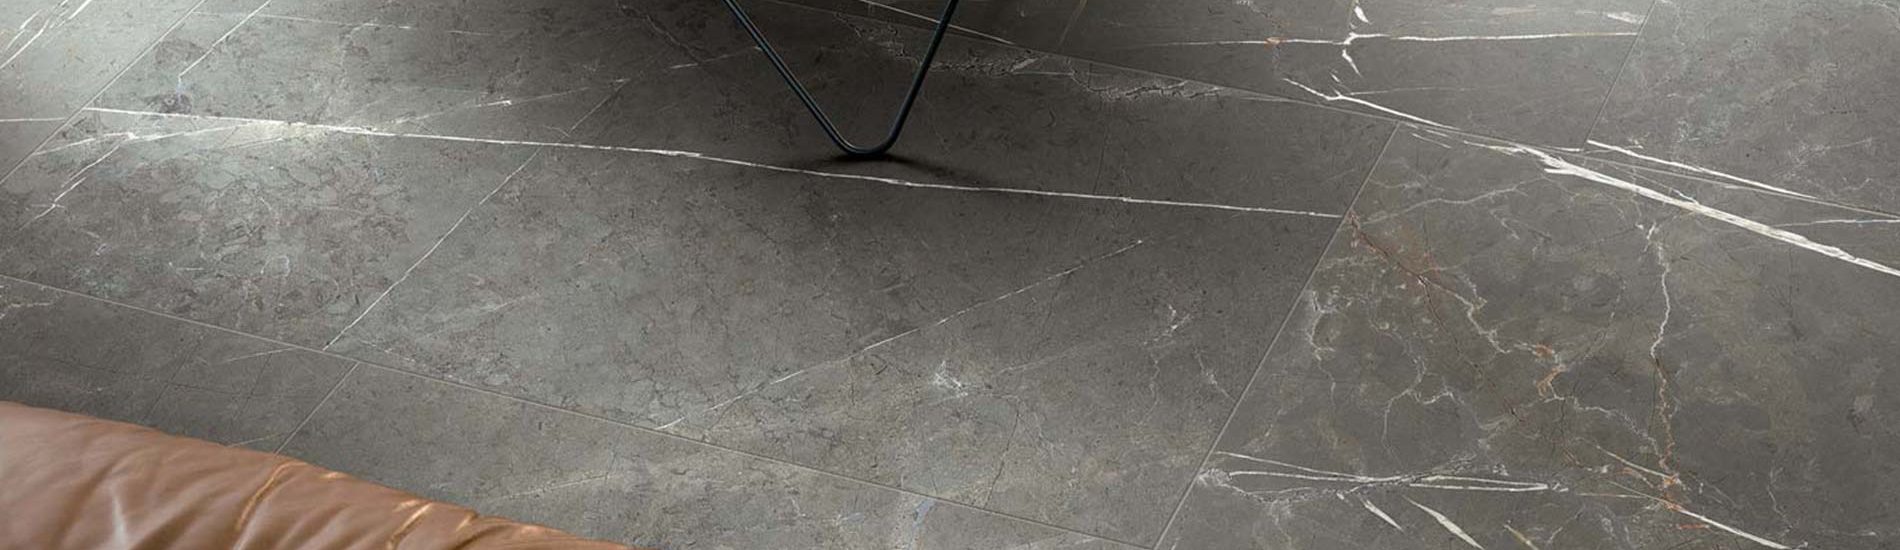 Stones & More 2.0 Italian Marble Look Floor & Wall Tile - BV Tile and Stone